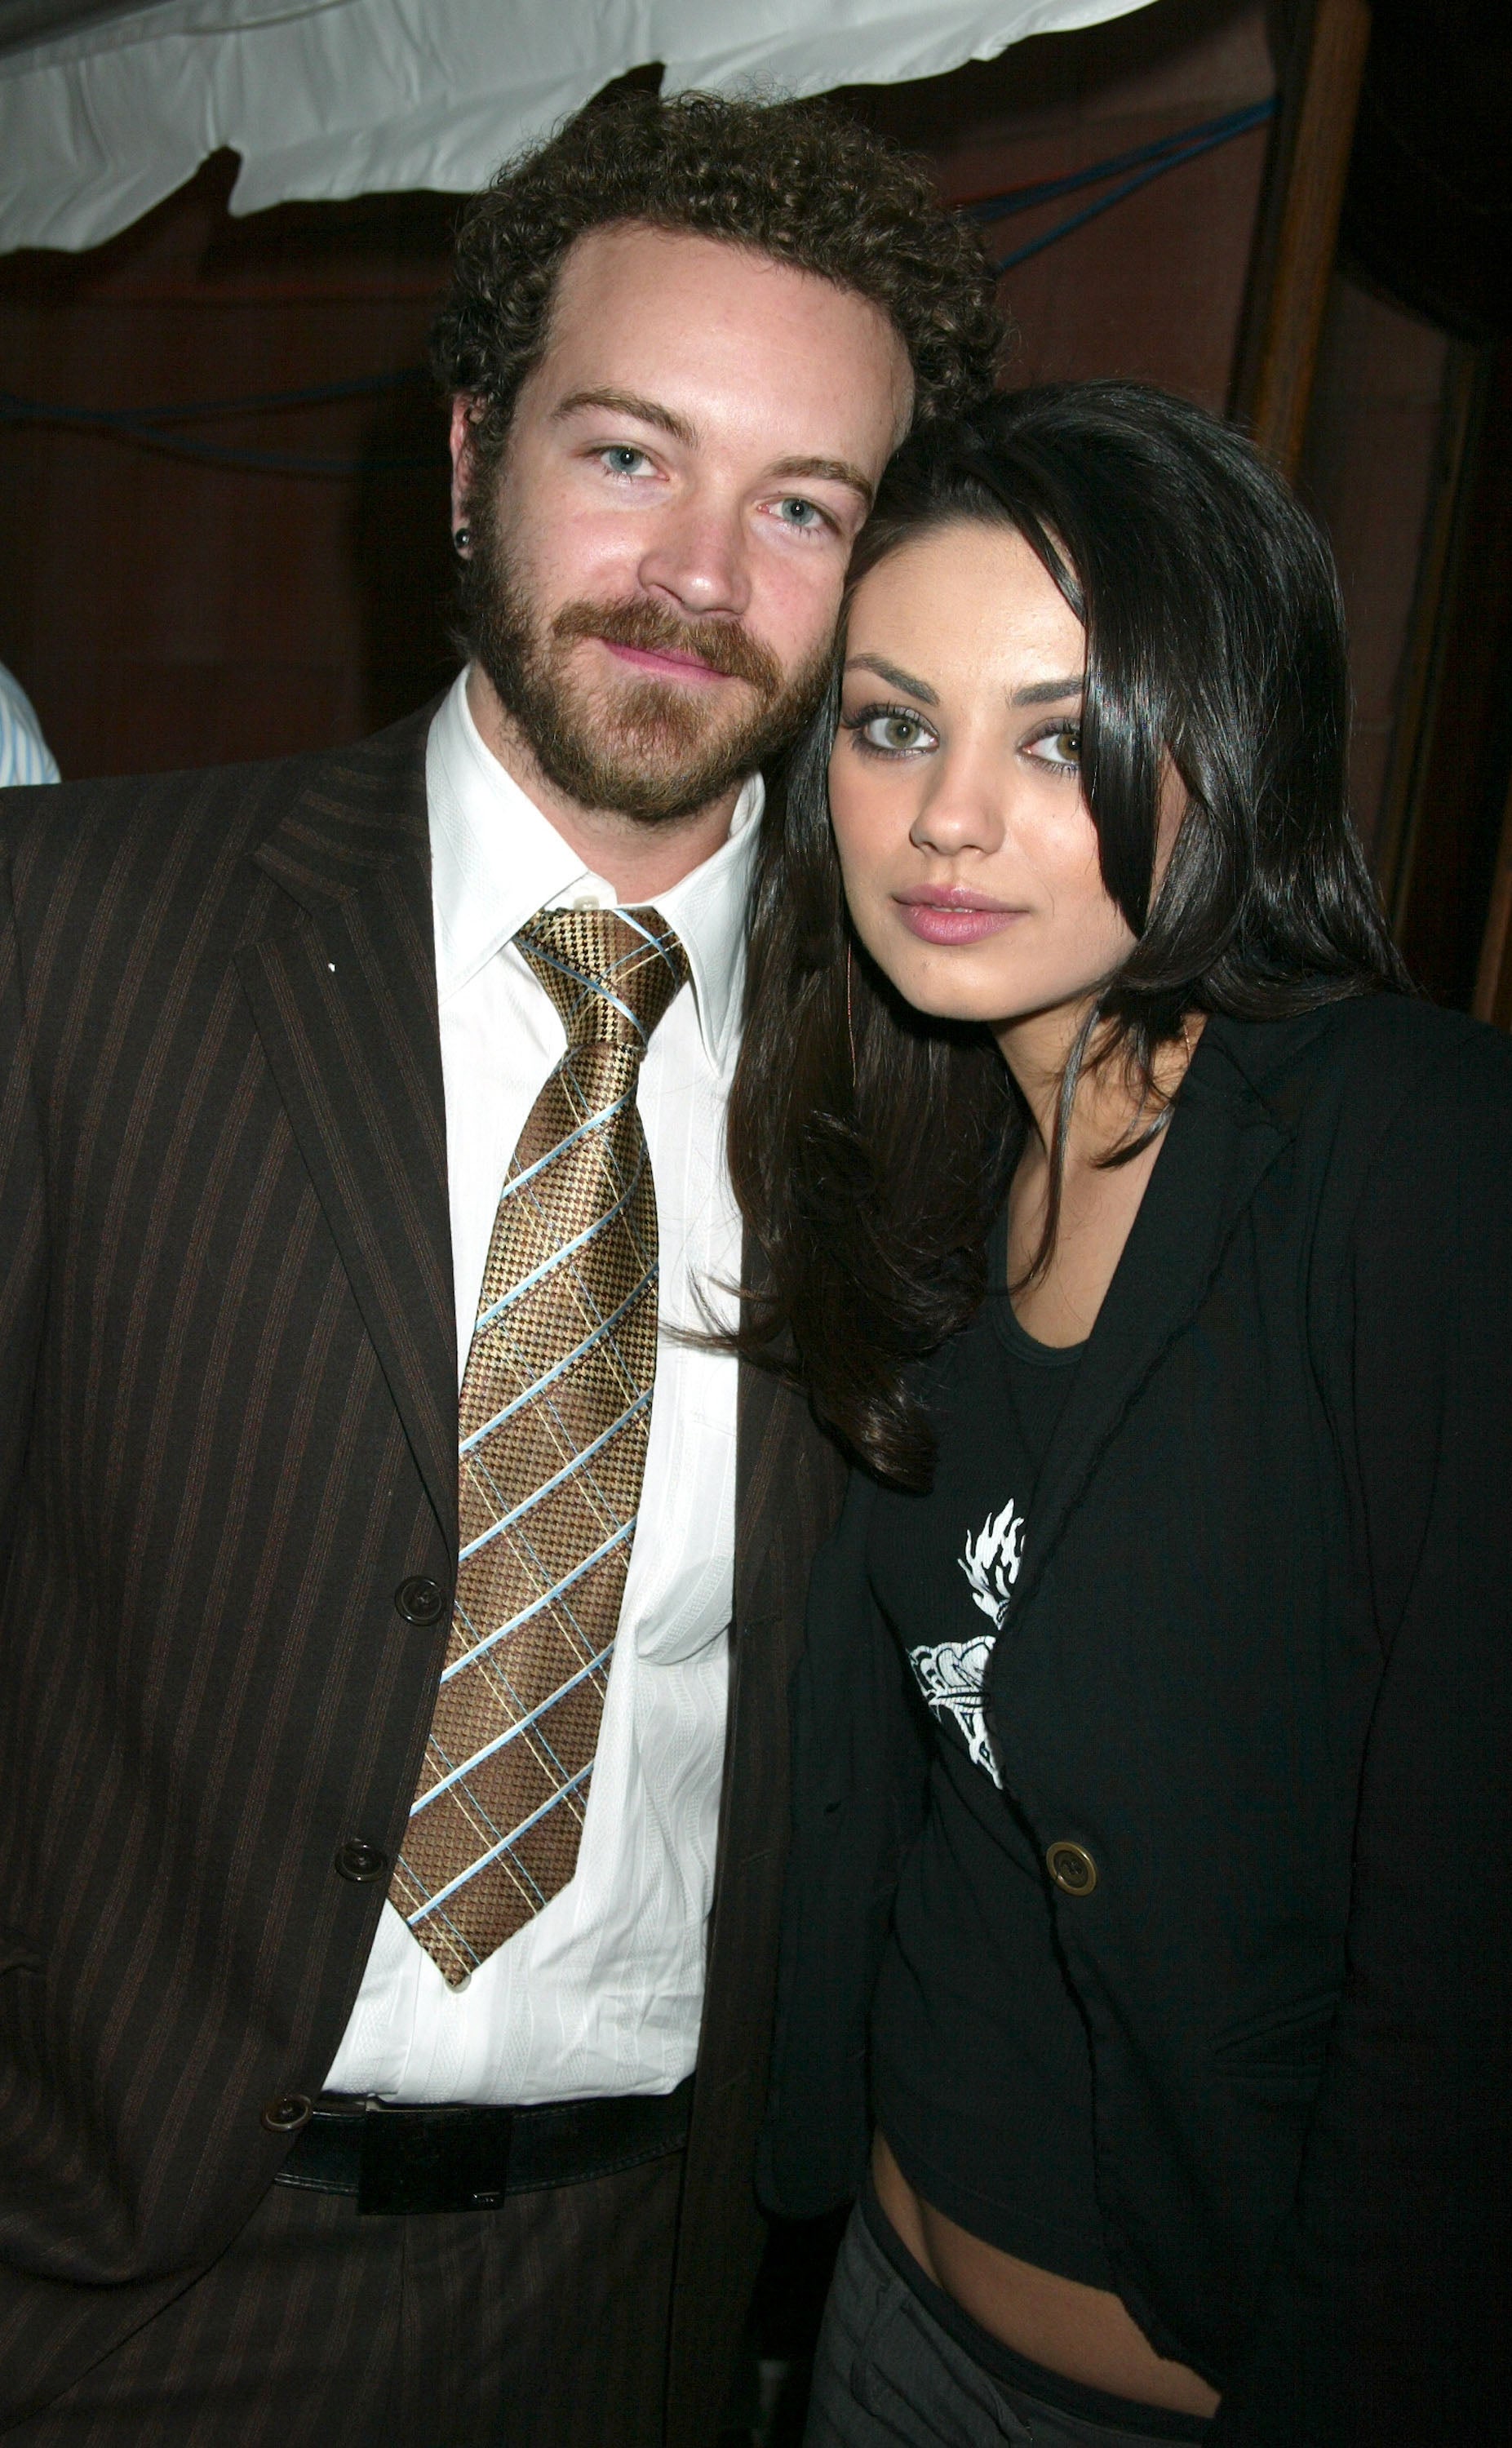 Close-up of Danny and Mila standing close together